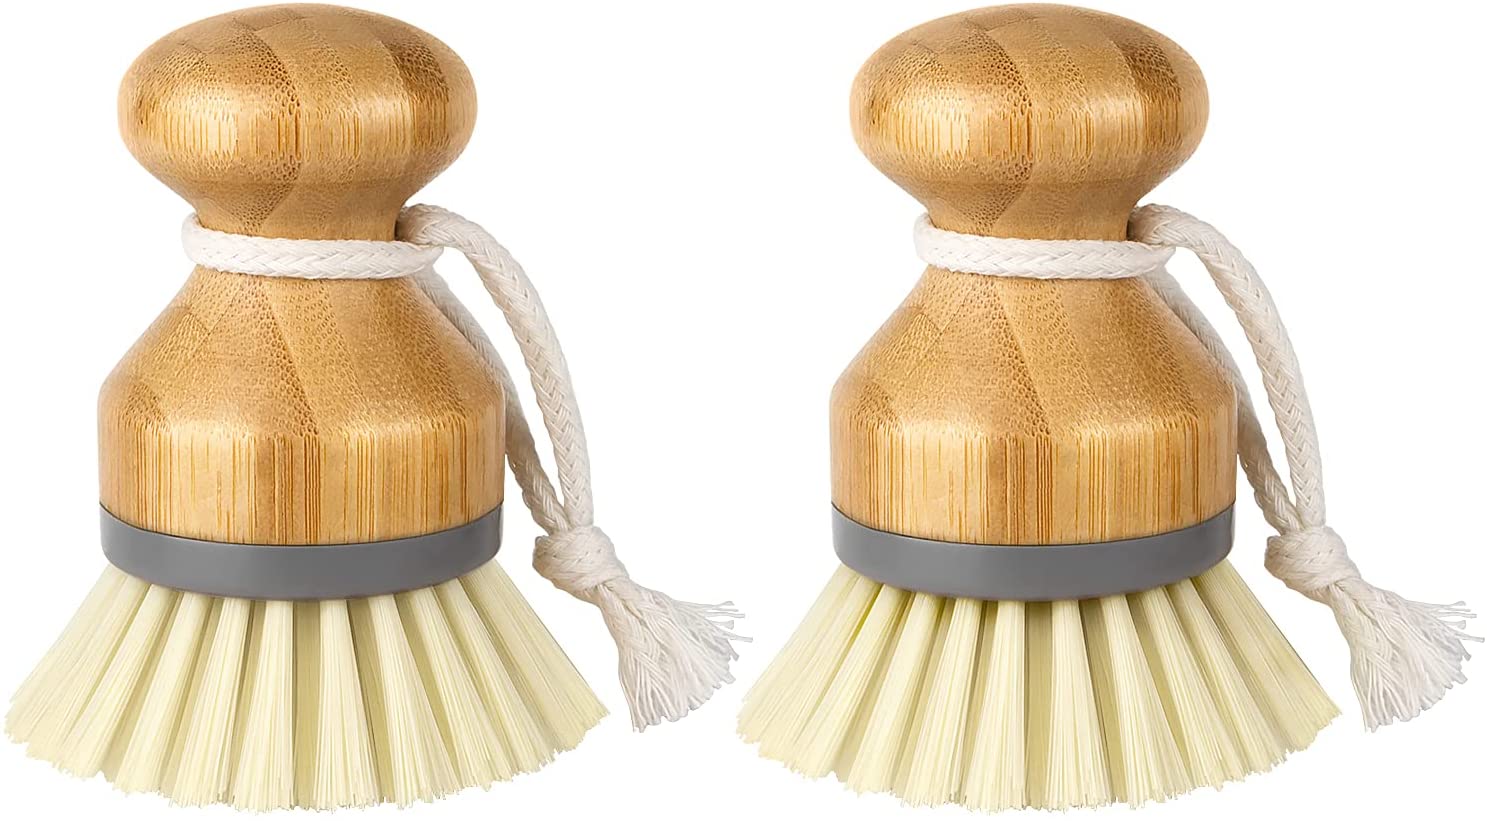 Norpro 2in1 Dish Scrub Brush Dishes Cleaning Scrubber Wand and Pot Scraper  - Bed Bath & Beyond - 32558395